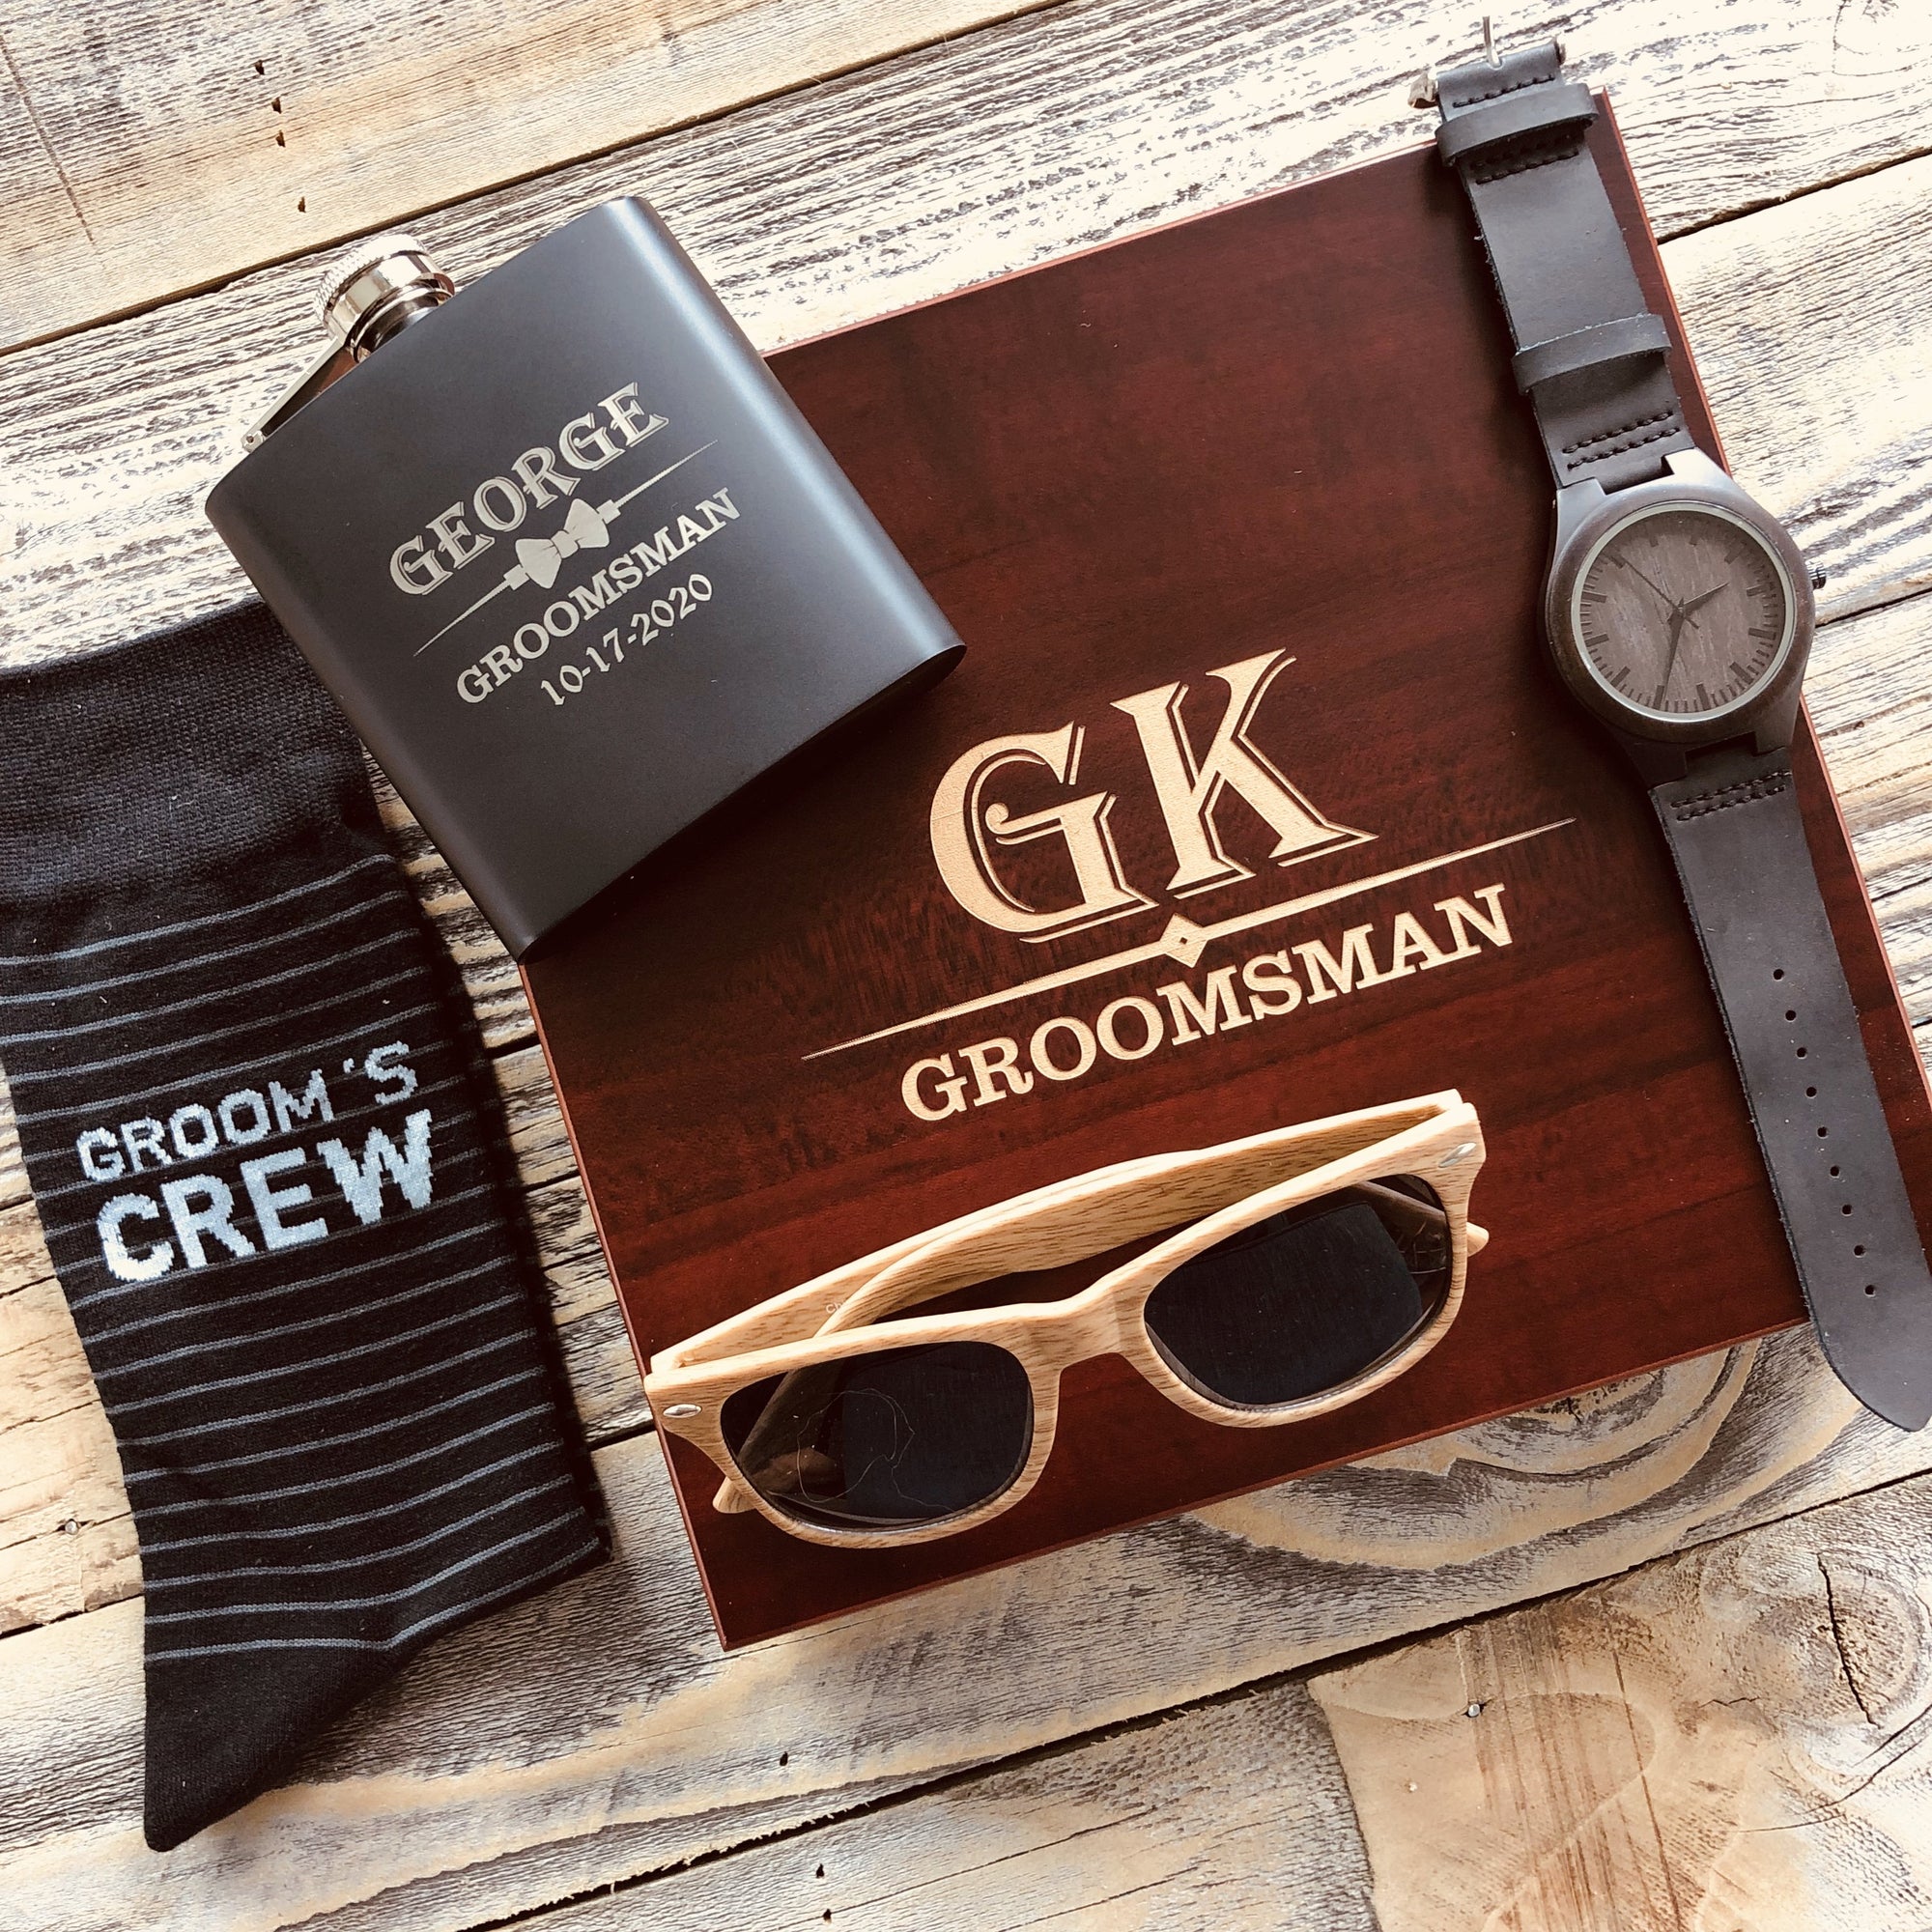 37 Romantic and Thoughtful 1-Year Anniversary Gifts for Her - Groovy  Groomsmen Gifts